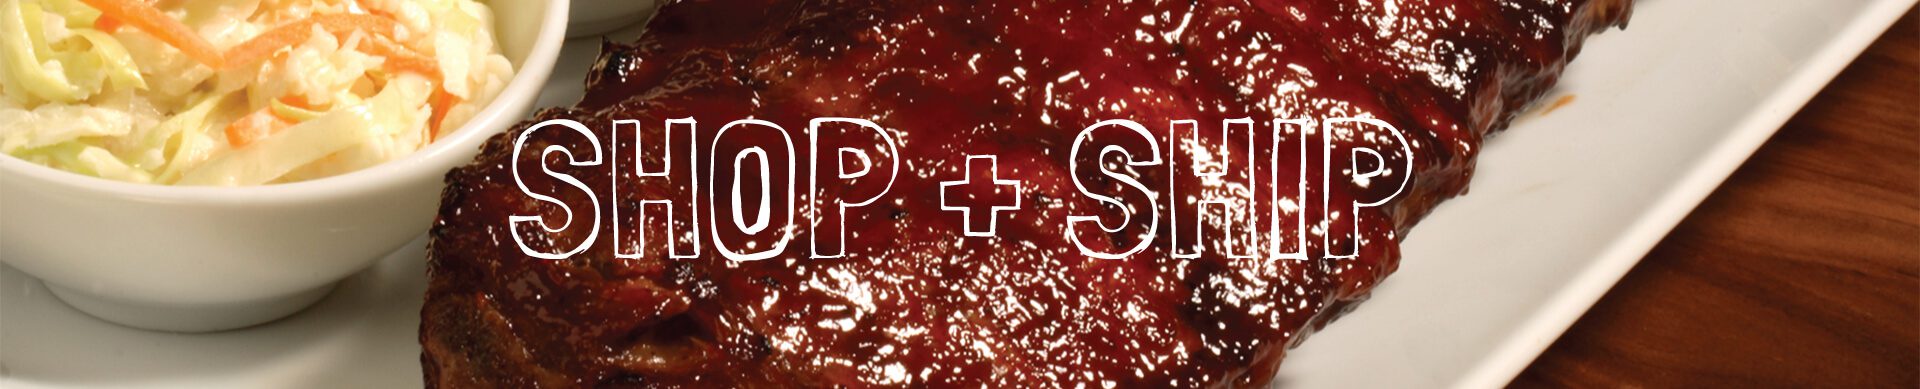 A closeup shot of juicy ribs with a salad on the side and a text over that says 'Shop + Ship'.